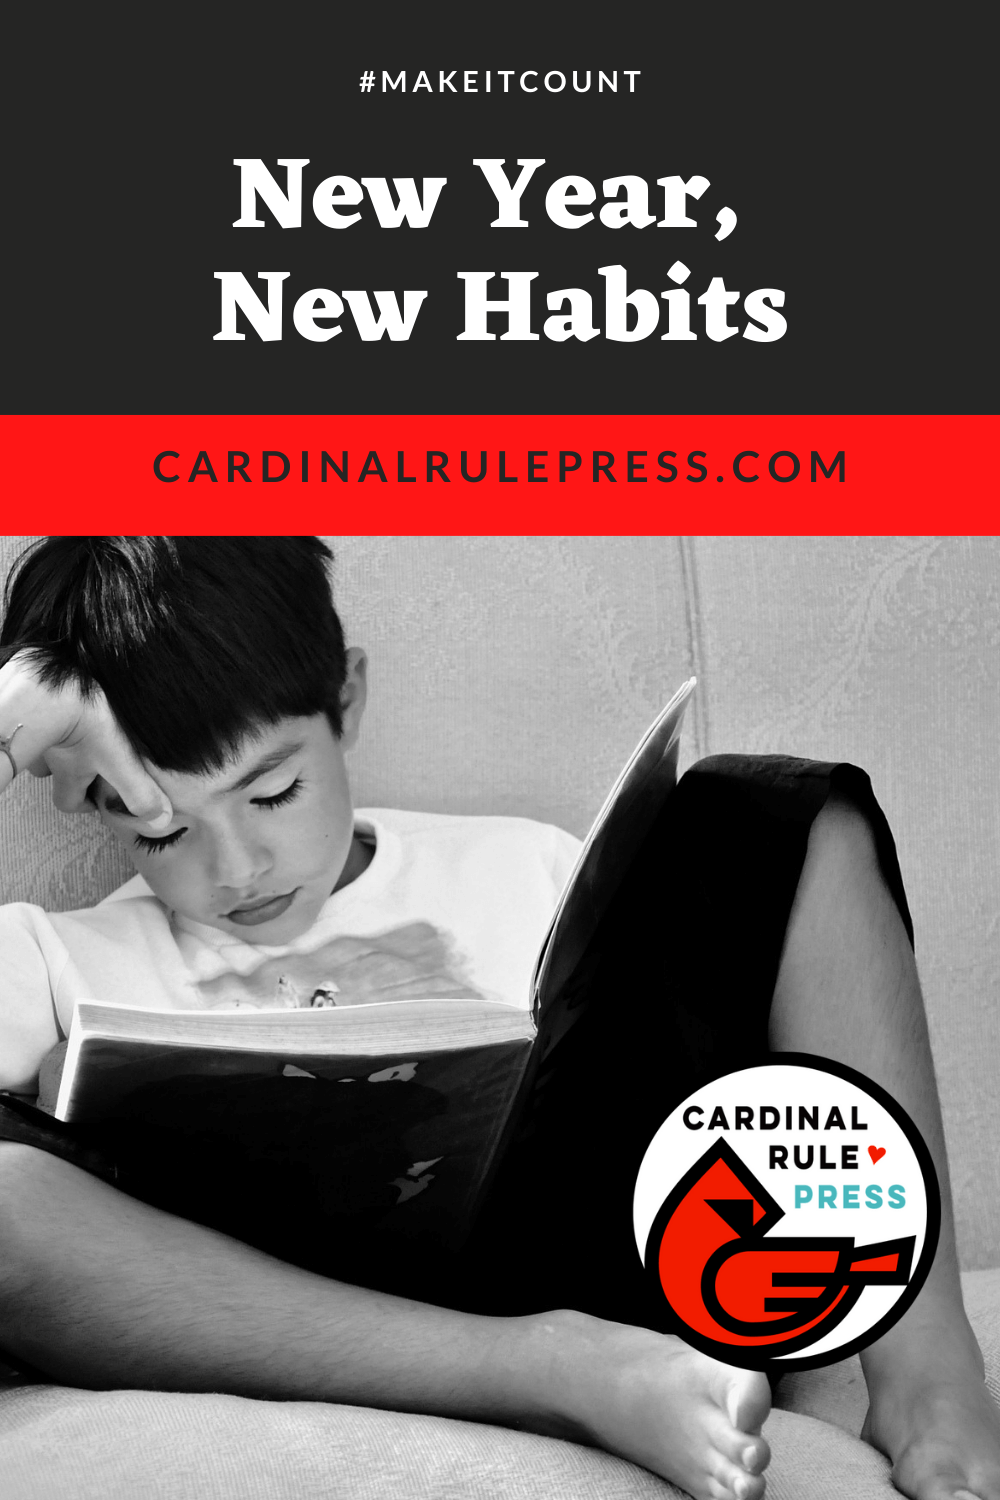 New Year New Habits It’s a New Year, let’s think about new habits we can implement that will help us move forward in 2021, no matter what life continues to throw out at us  #ForWriters #Librarians #Booksellers